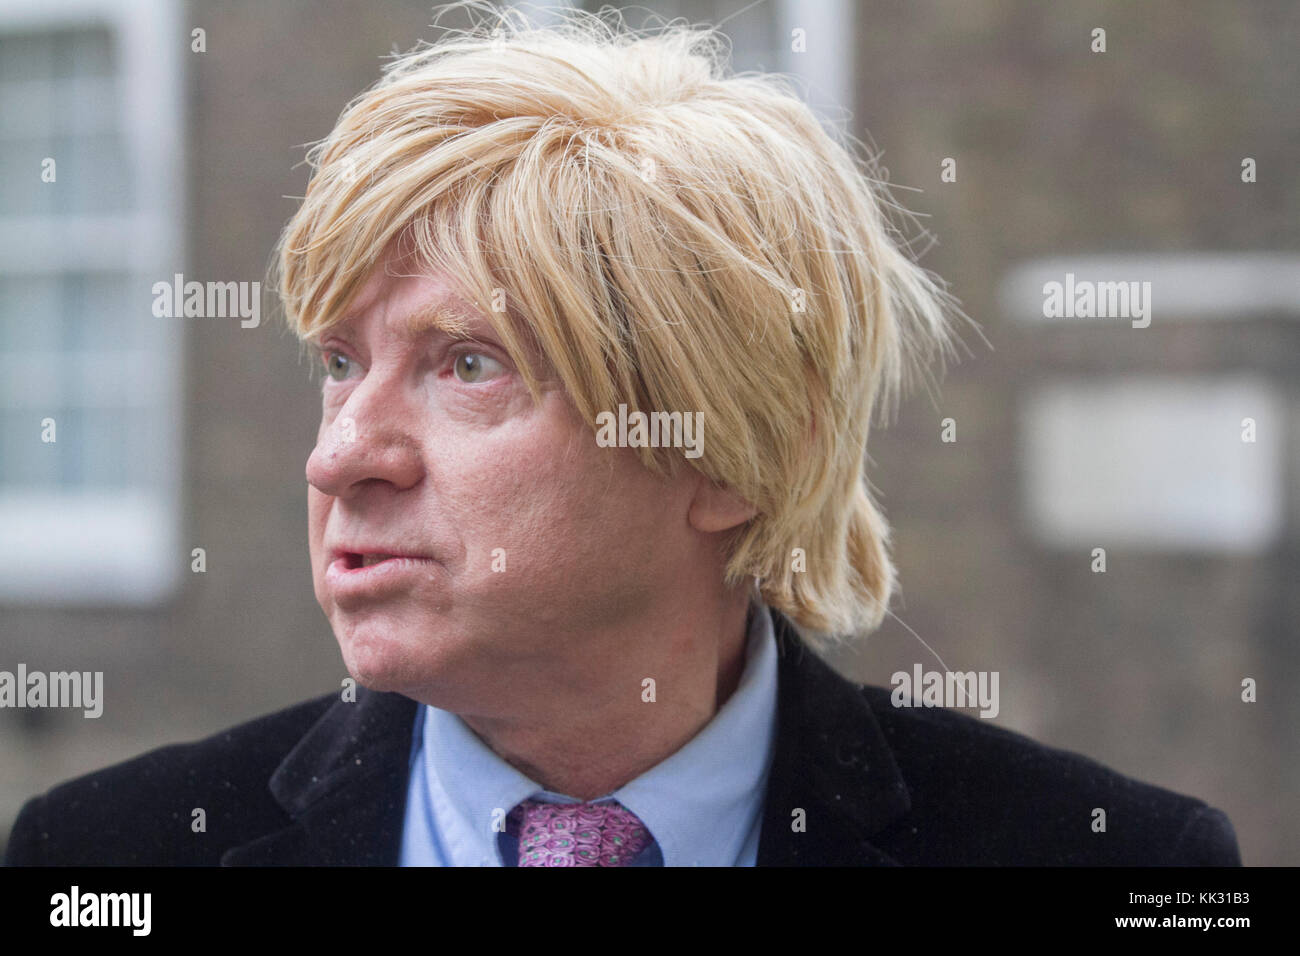 London,UK. 29th November 2017. British Conservative Politician Michael Fabricant arrives in Downing Street. Michael Fabricant is Member of Parliament for Lichfield in Staffordshire England Credit: amer ghazzal/Alamy Live News Stock Photo